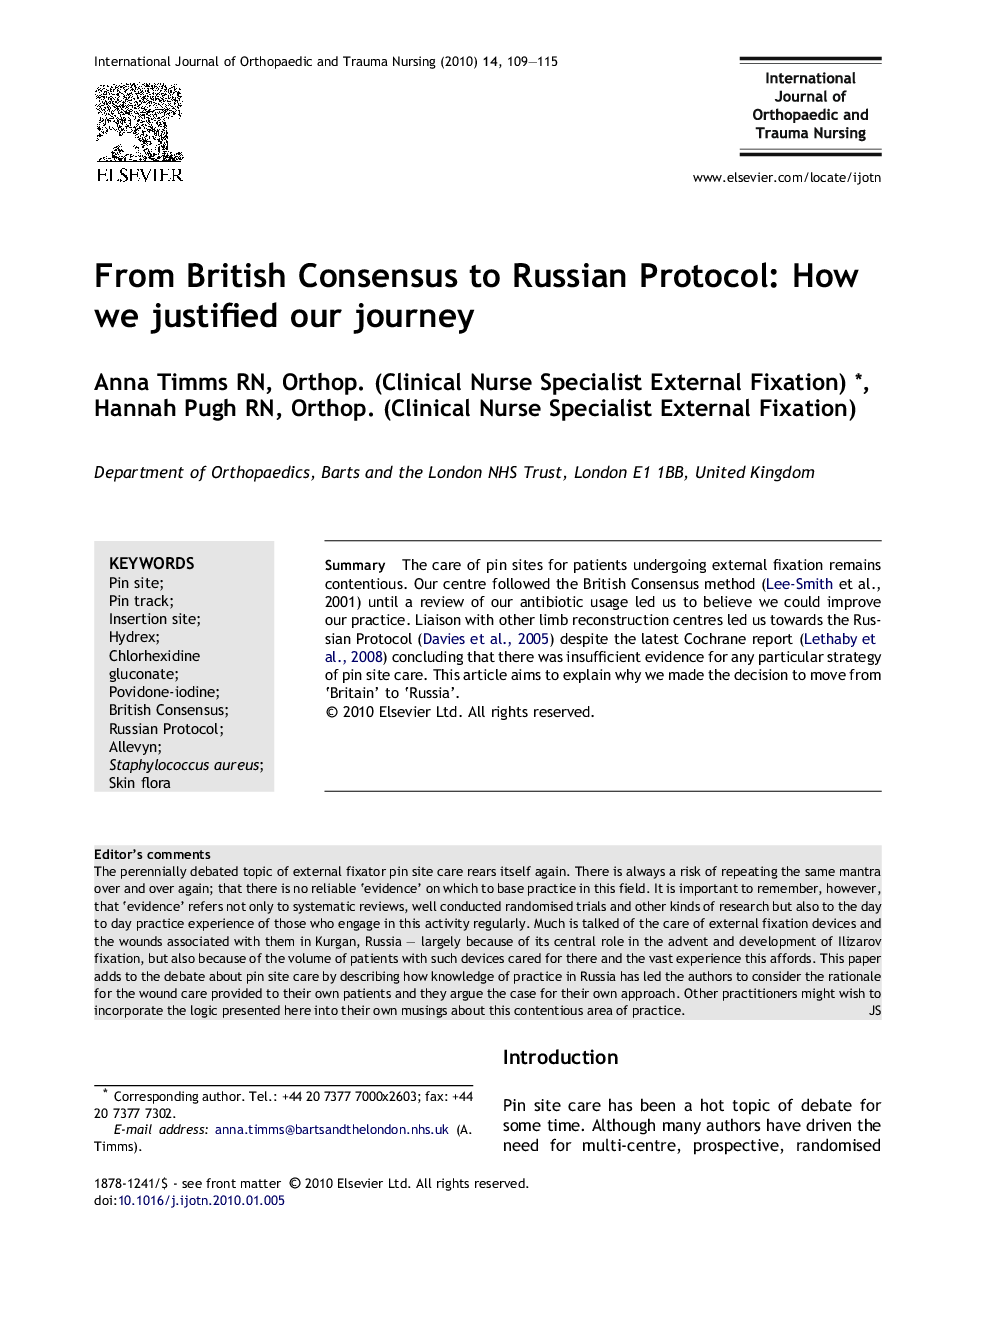 From British Consensus to Russian Protocol: How we justified our journey